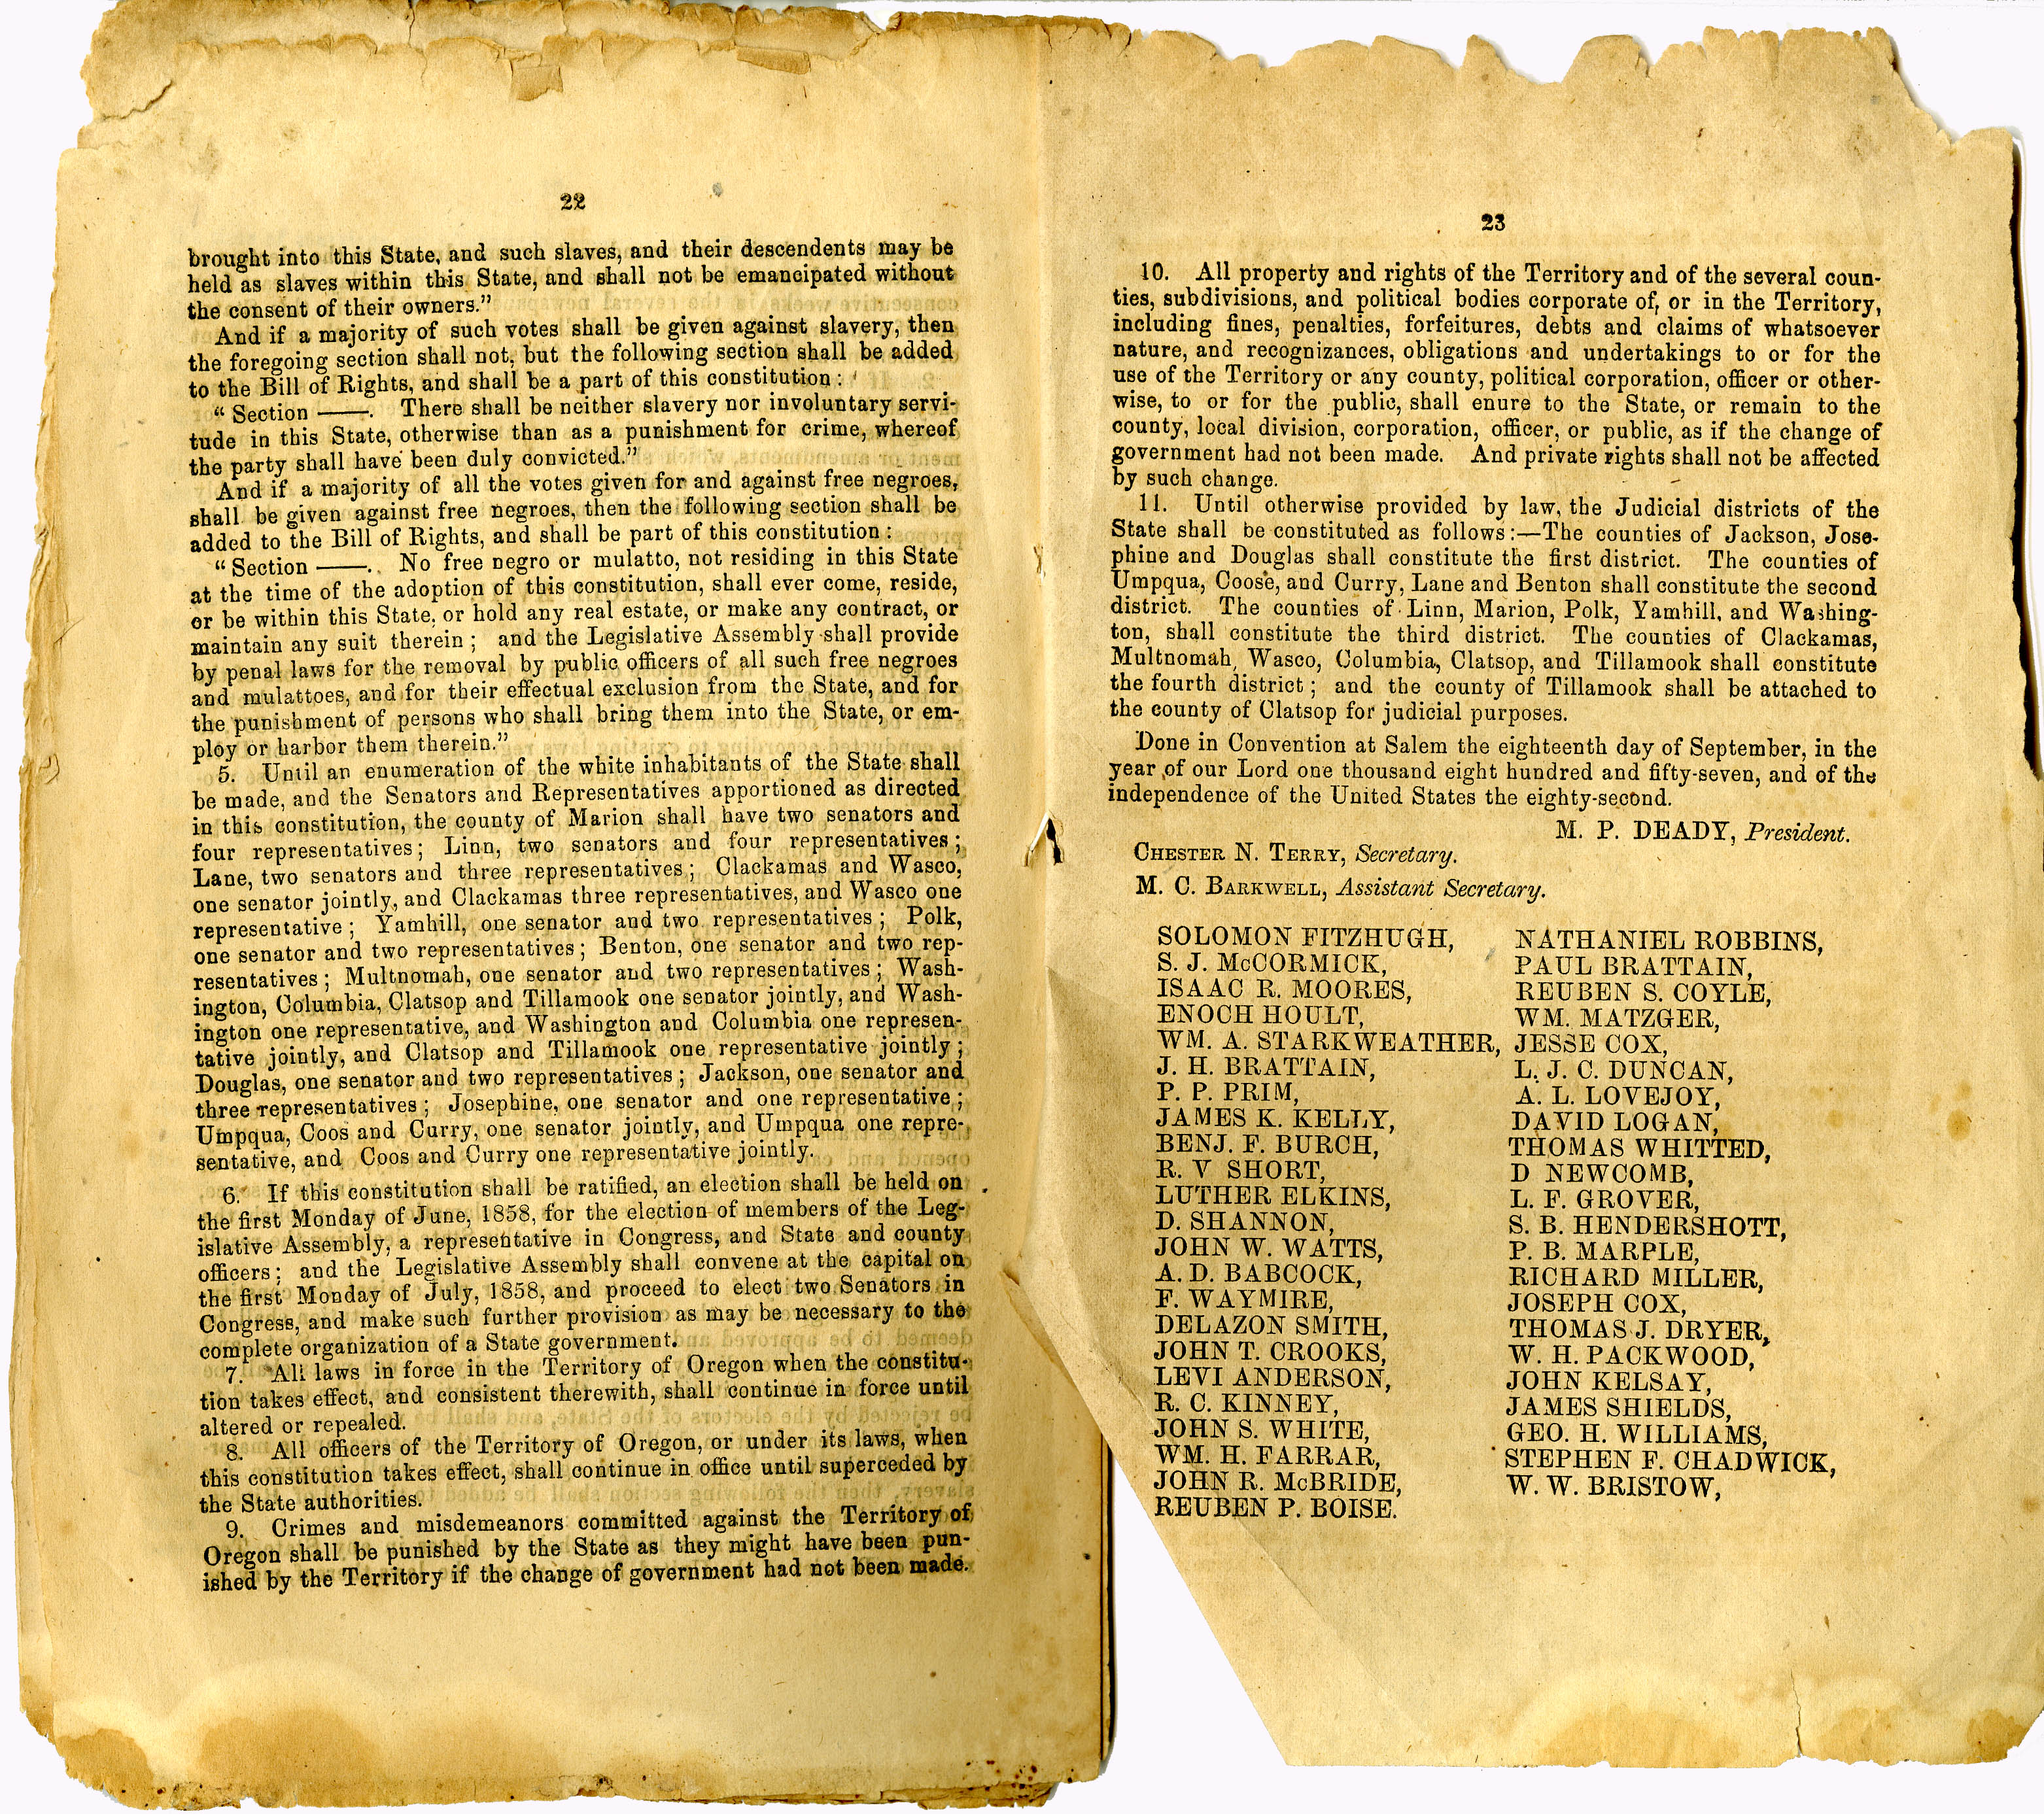 Article XVIII, State Constitution, outlining slavery and exclusion laws, 18...